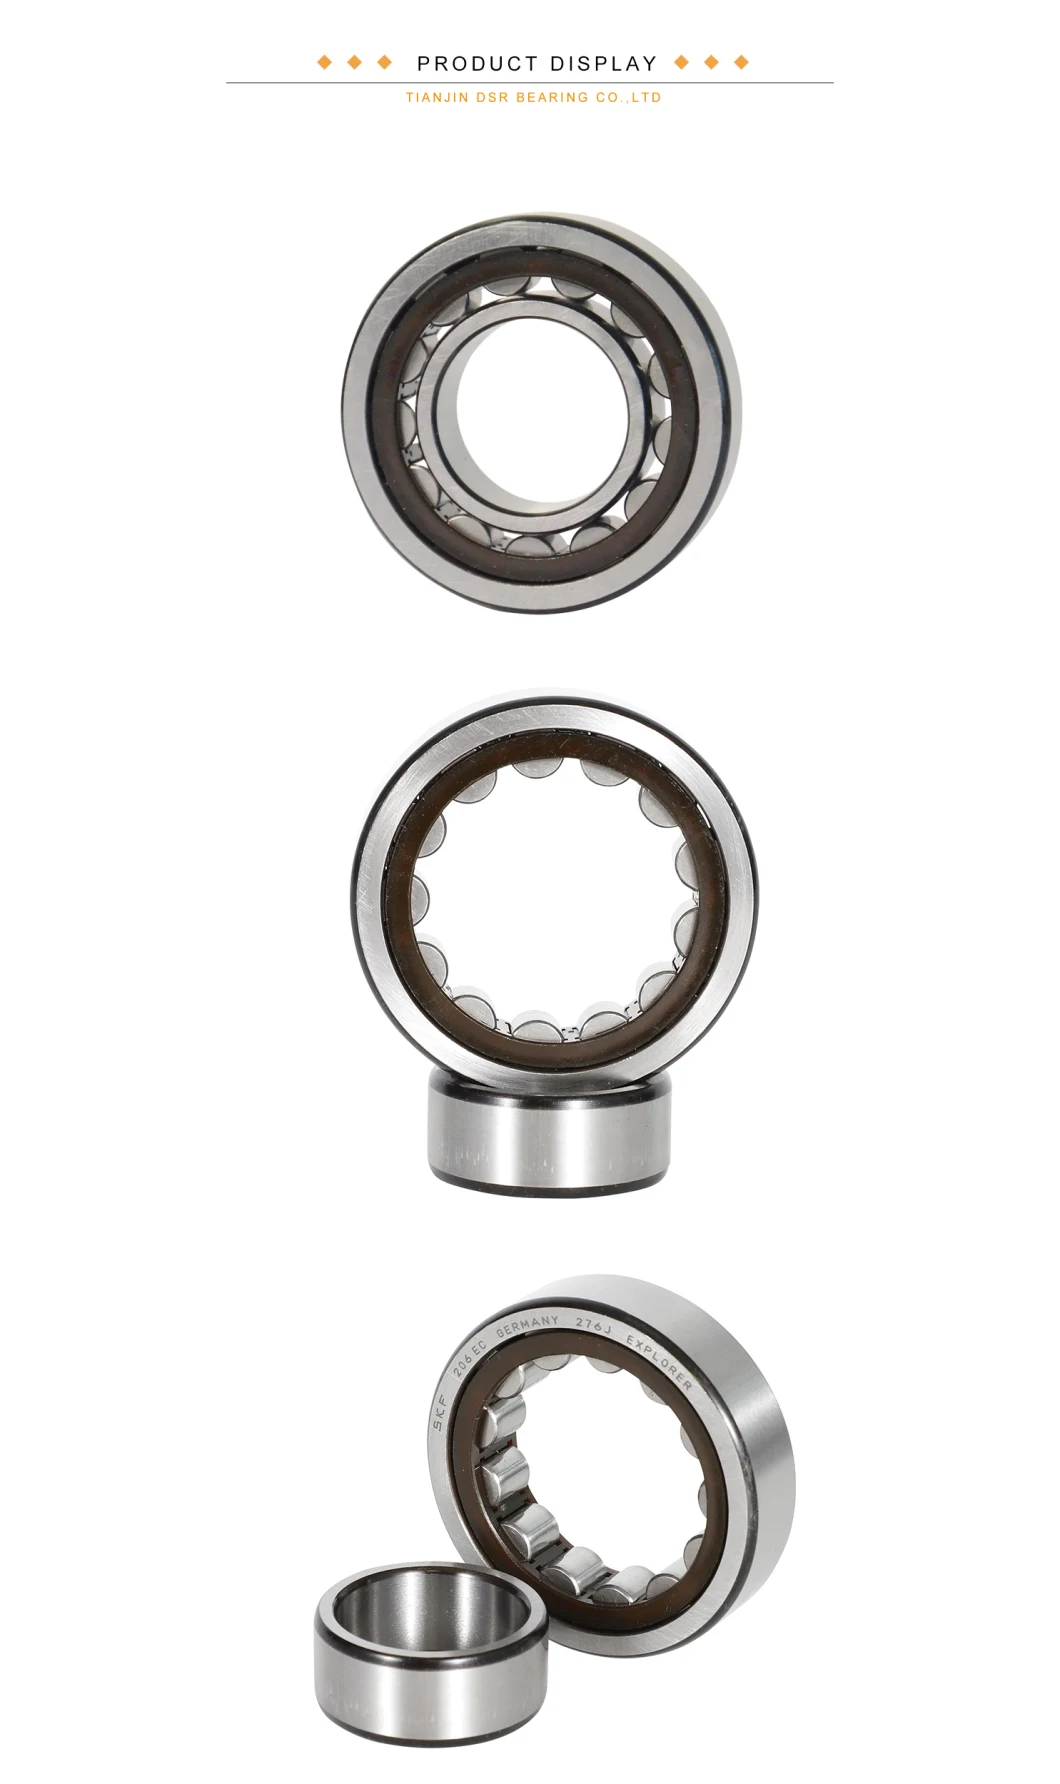 Nj 202 Ecp Cylindrical Roller Bearing / Tapered Ball Bearing/ Needle Bearing/ Spherical Roller Bearing/ Deep Groove Ball Bearing/ Bearing Price/ Clutch Bearing